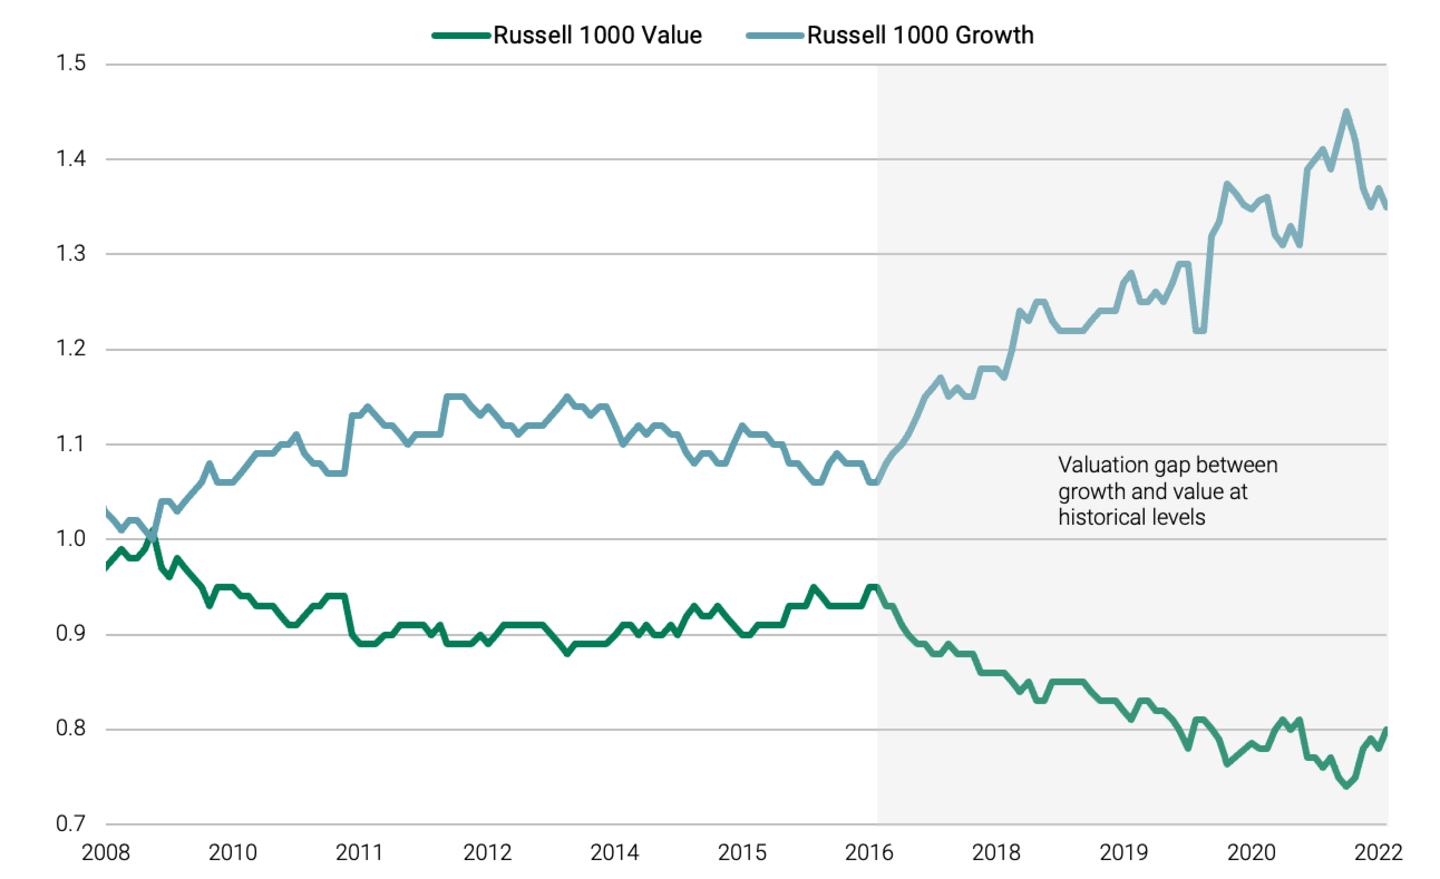 Valuation gap between growth and value at historical levels.